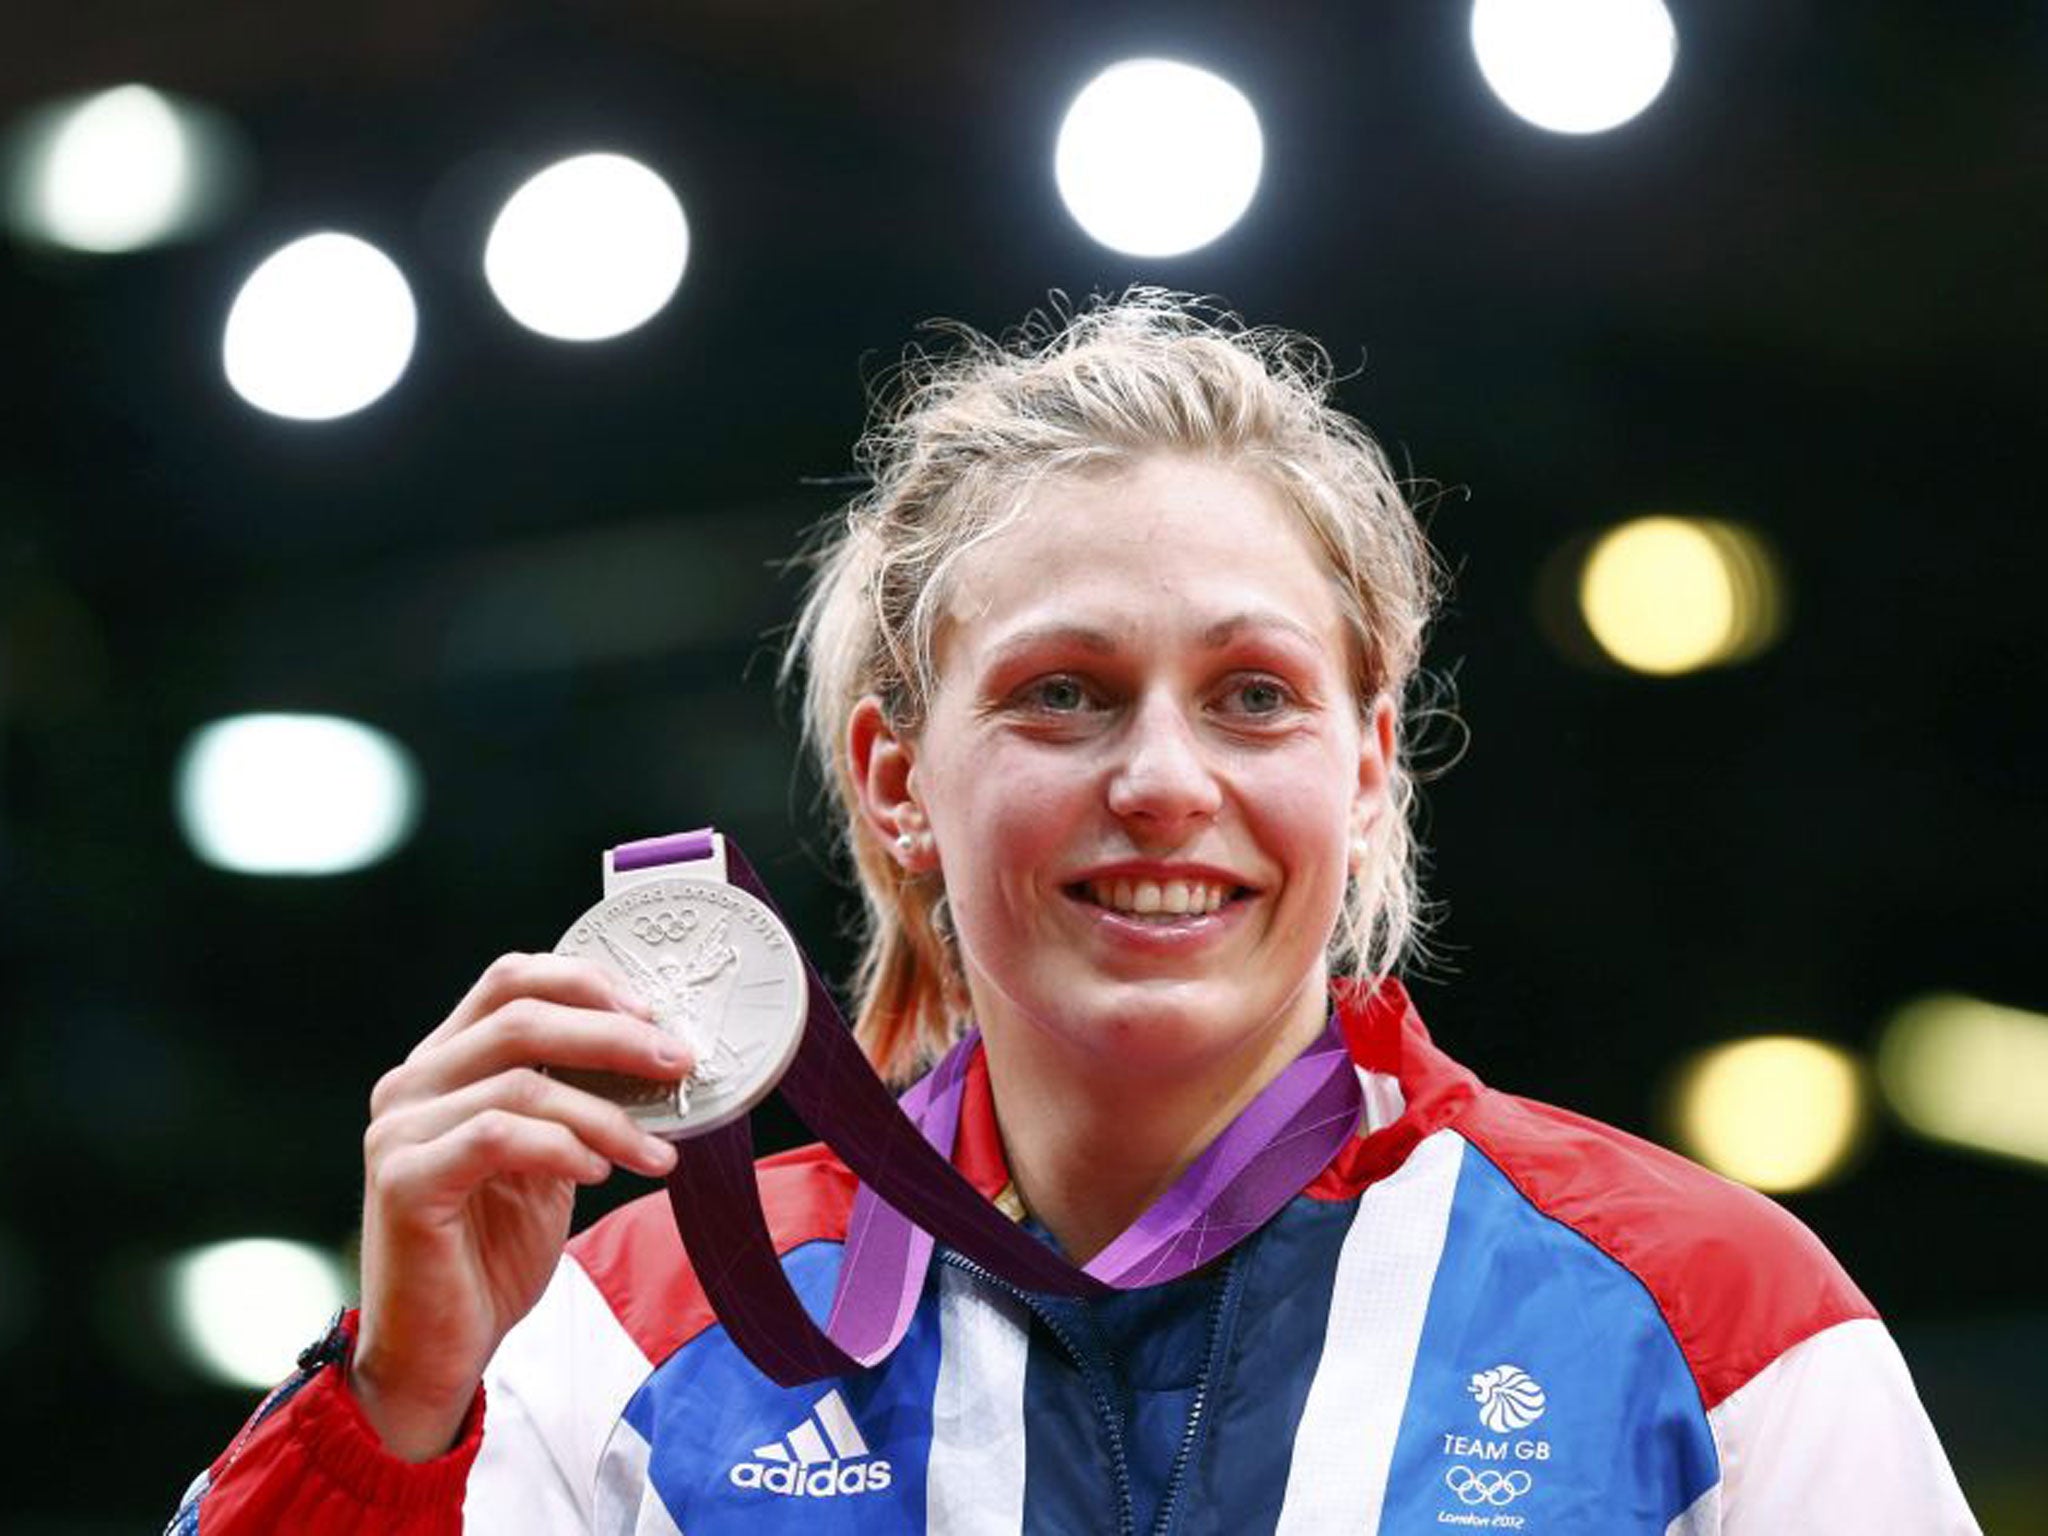 Gemma Gibbons was among the medallists yesterday